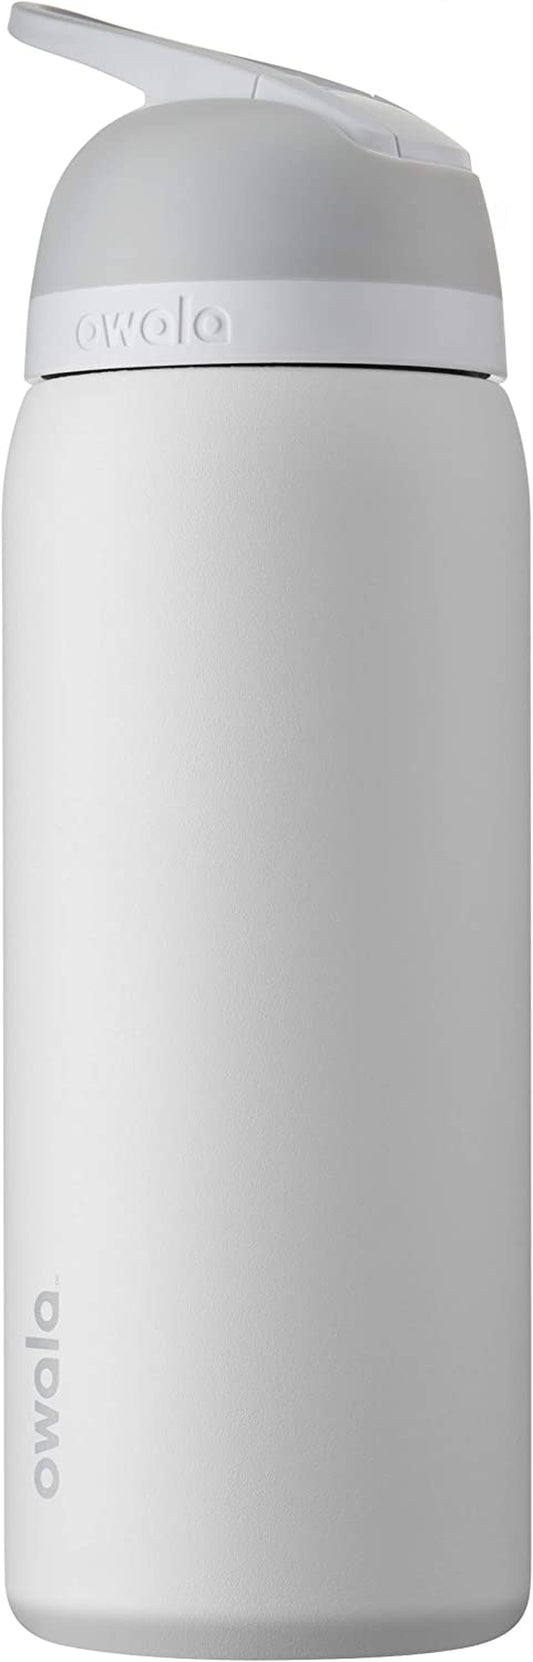 Flip Insulated Stainless Steel Water Bottle with Straw and Locking Lid for Sports and Travel, Bpa-Free, 32-Ounce, Shy Marshmallow